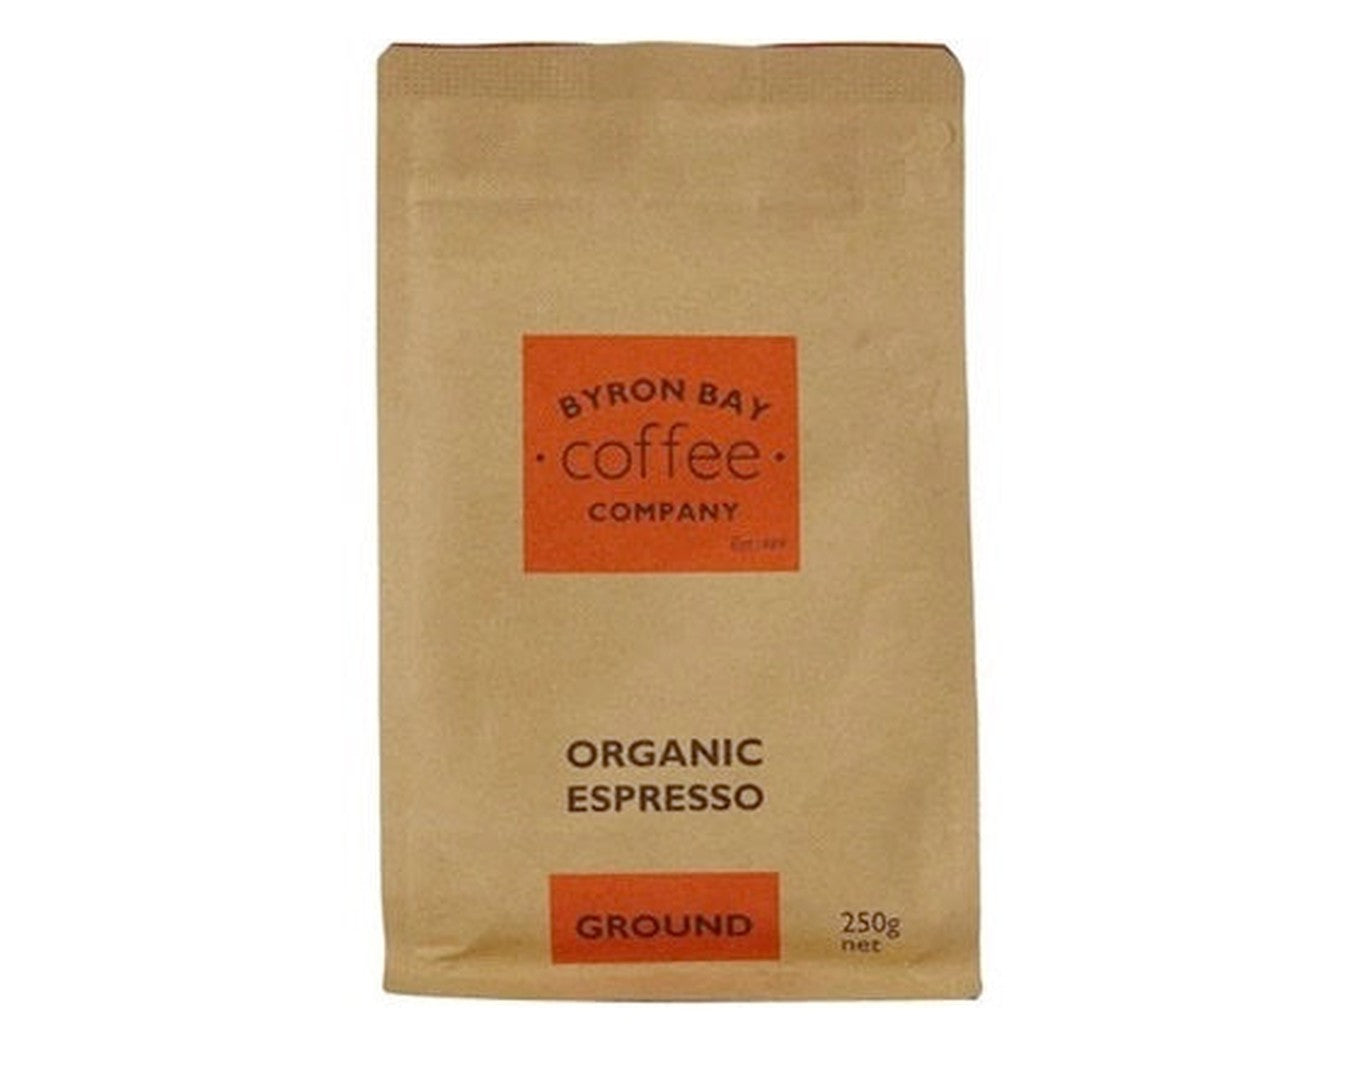 Byron Bay Coffee Co. Espresso Ground 250g-Beverages-The Local Basket